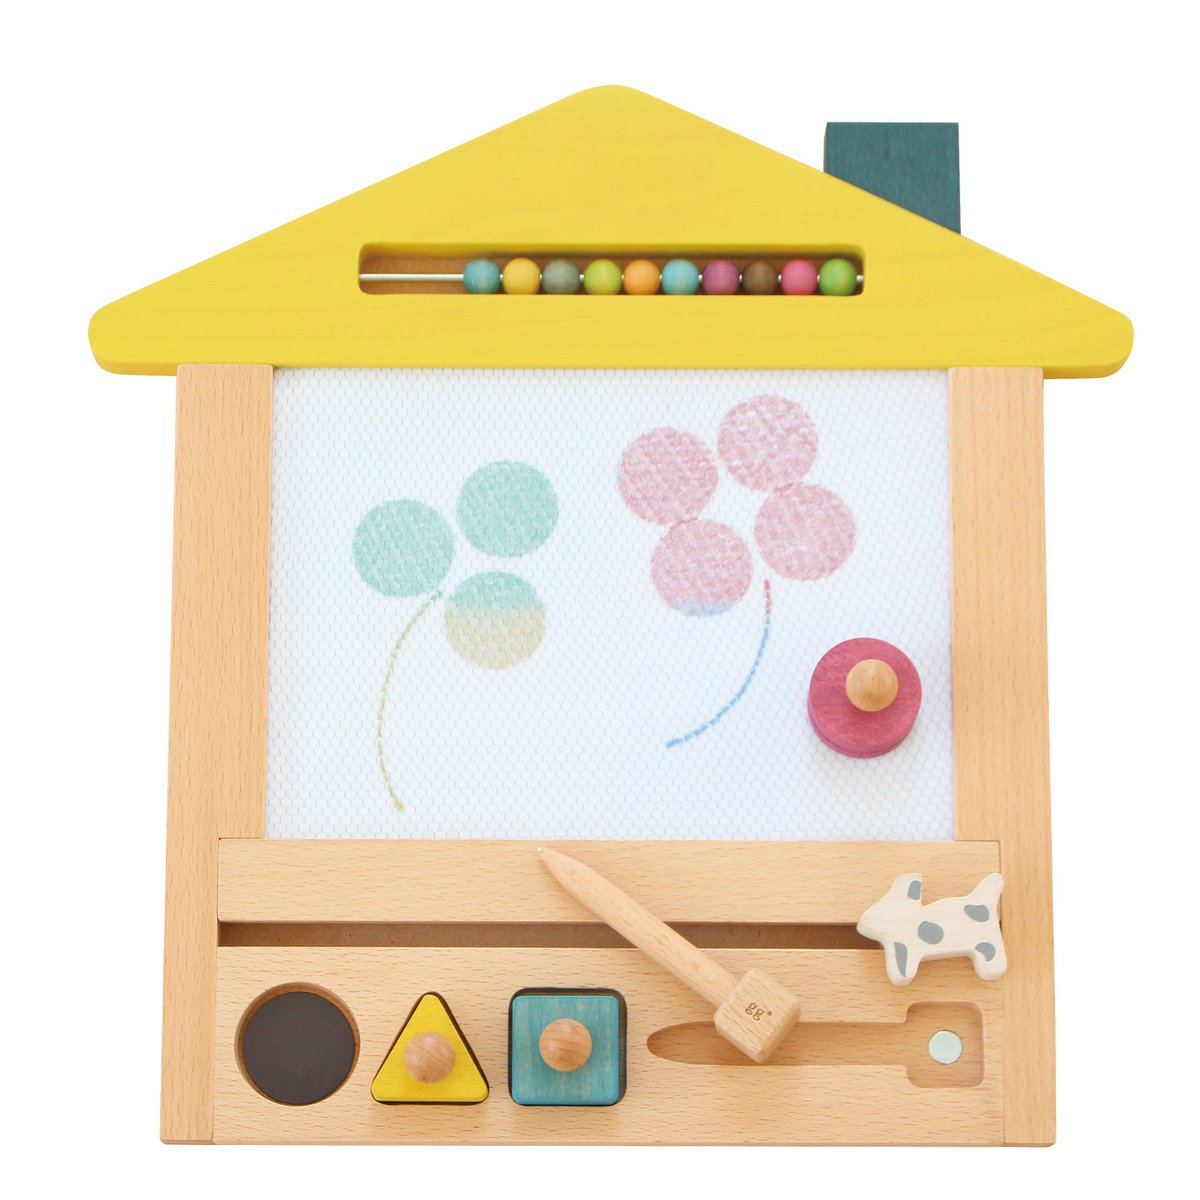 Oekaki house - magic drawing board (Available in 2 colors)